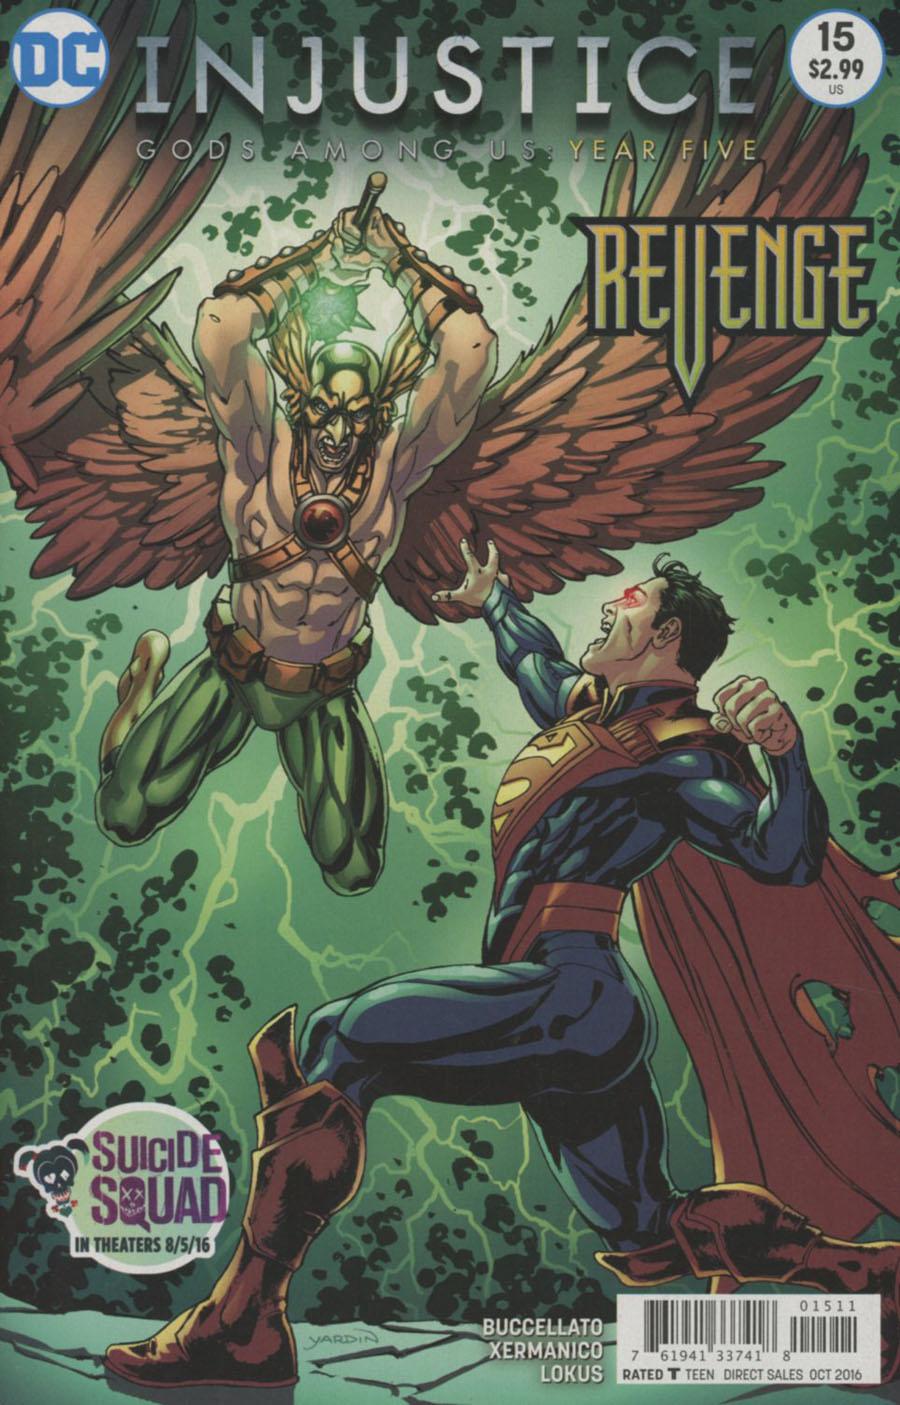 Injustice Gods Among Us Year Five Vol. 1 #15